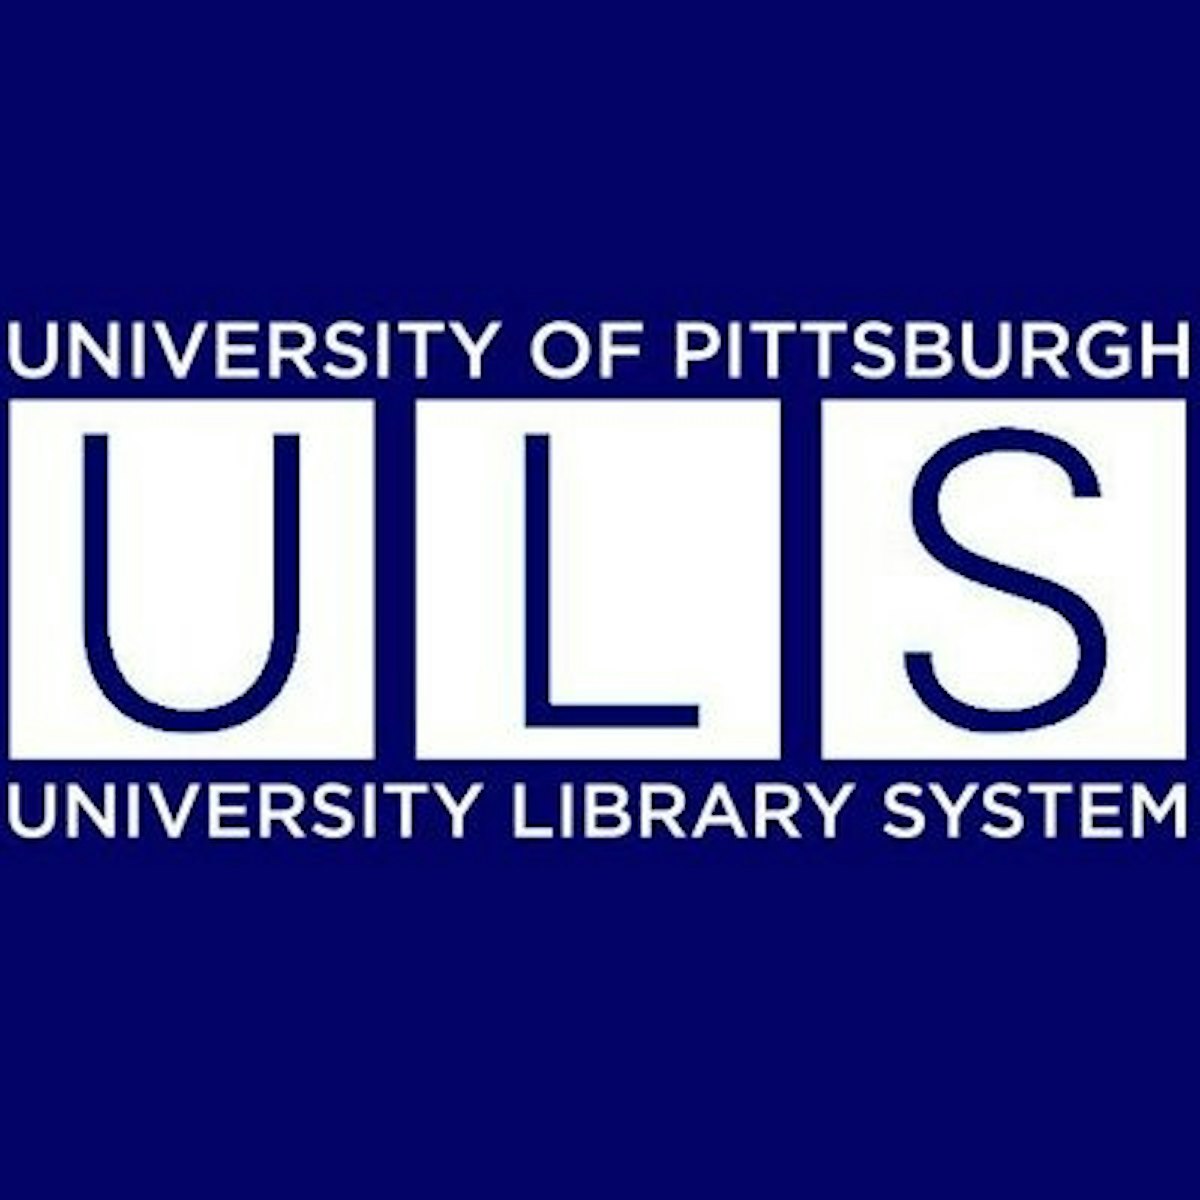 University of Pittsburgh Library System logo